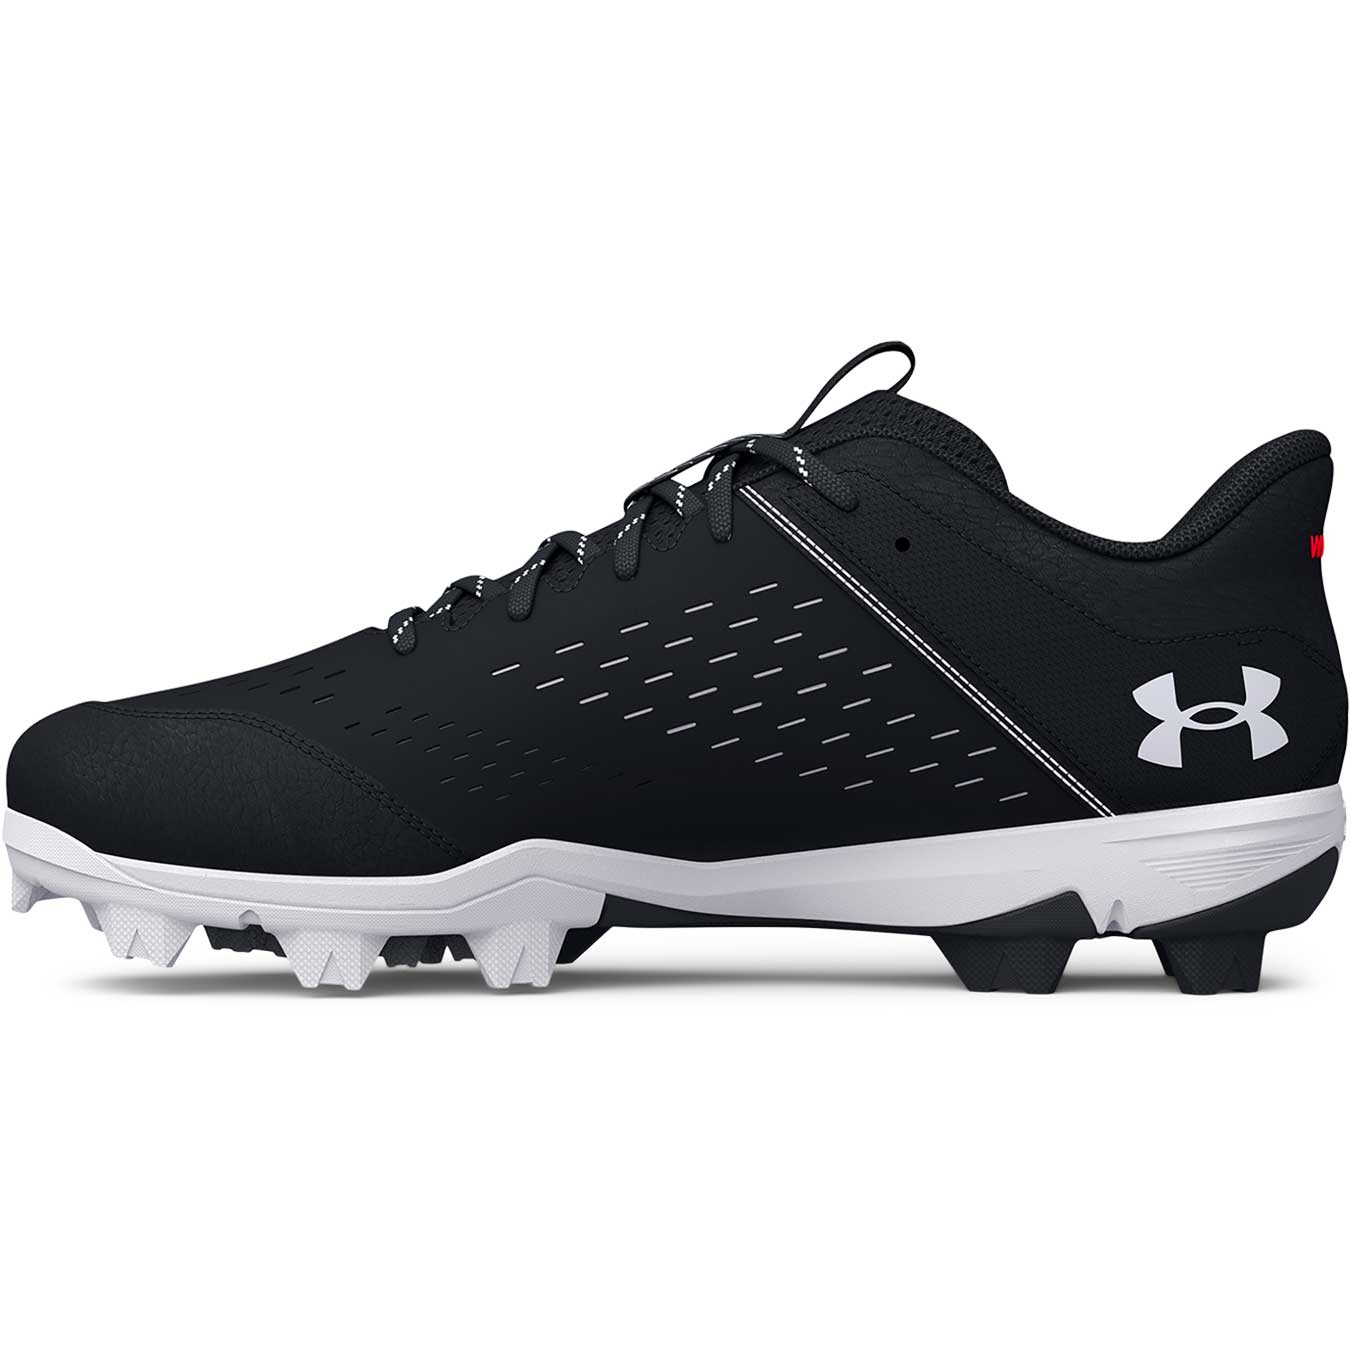 Under Armour Leadoff Low RM Molded Cleat